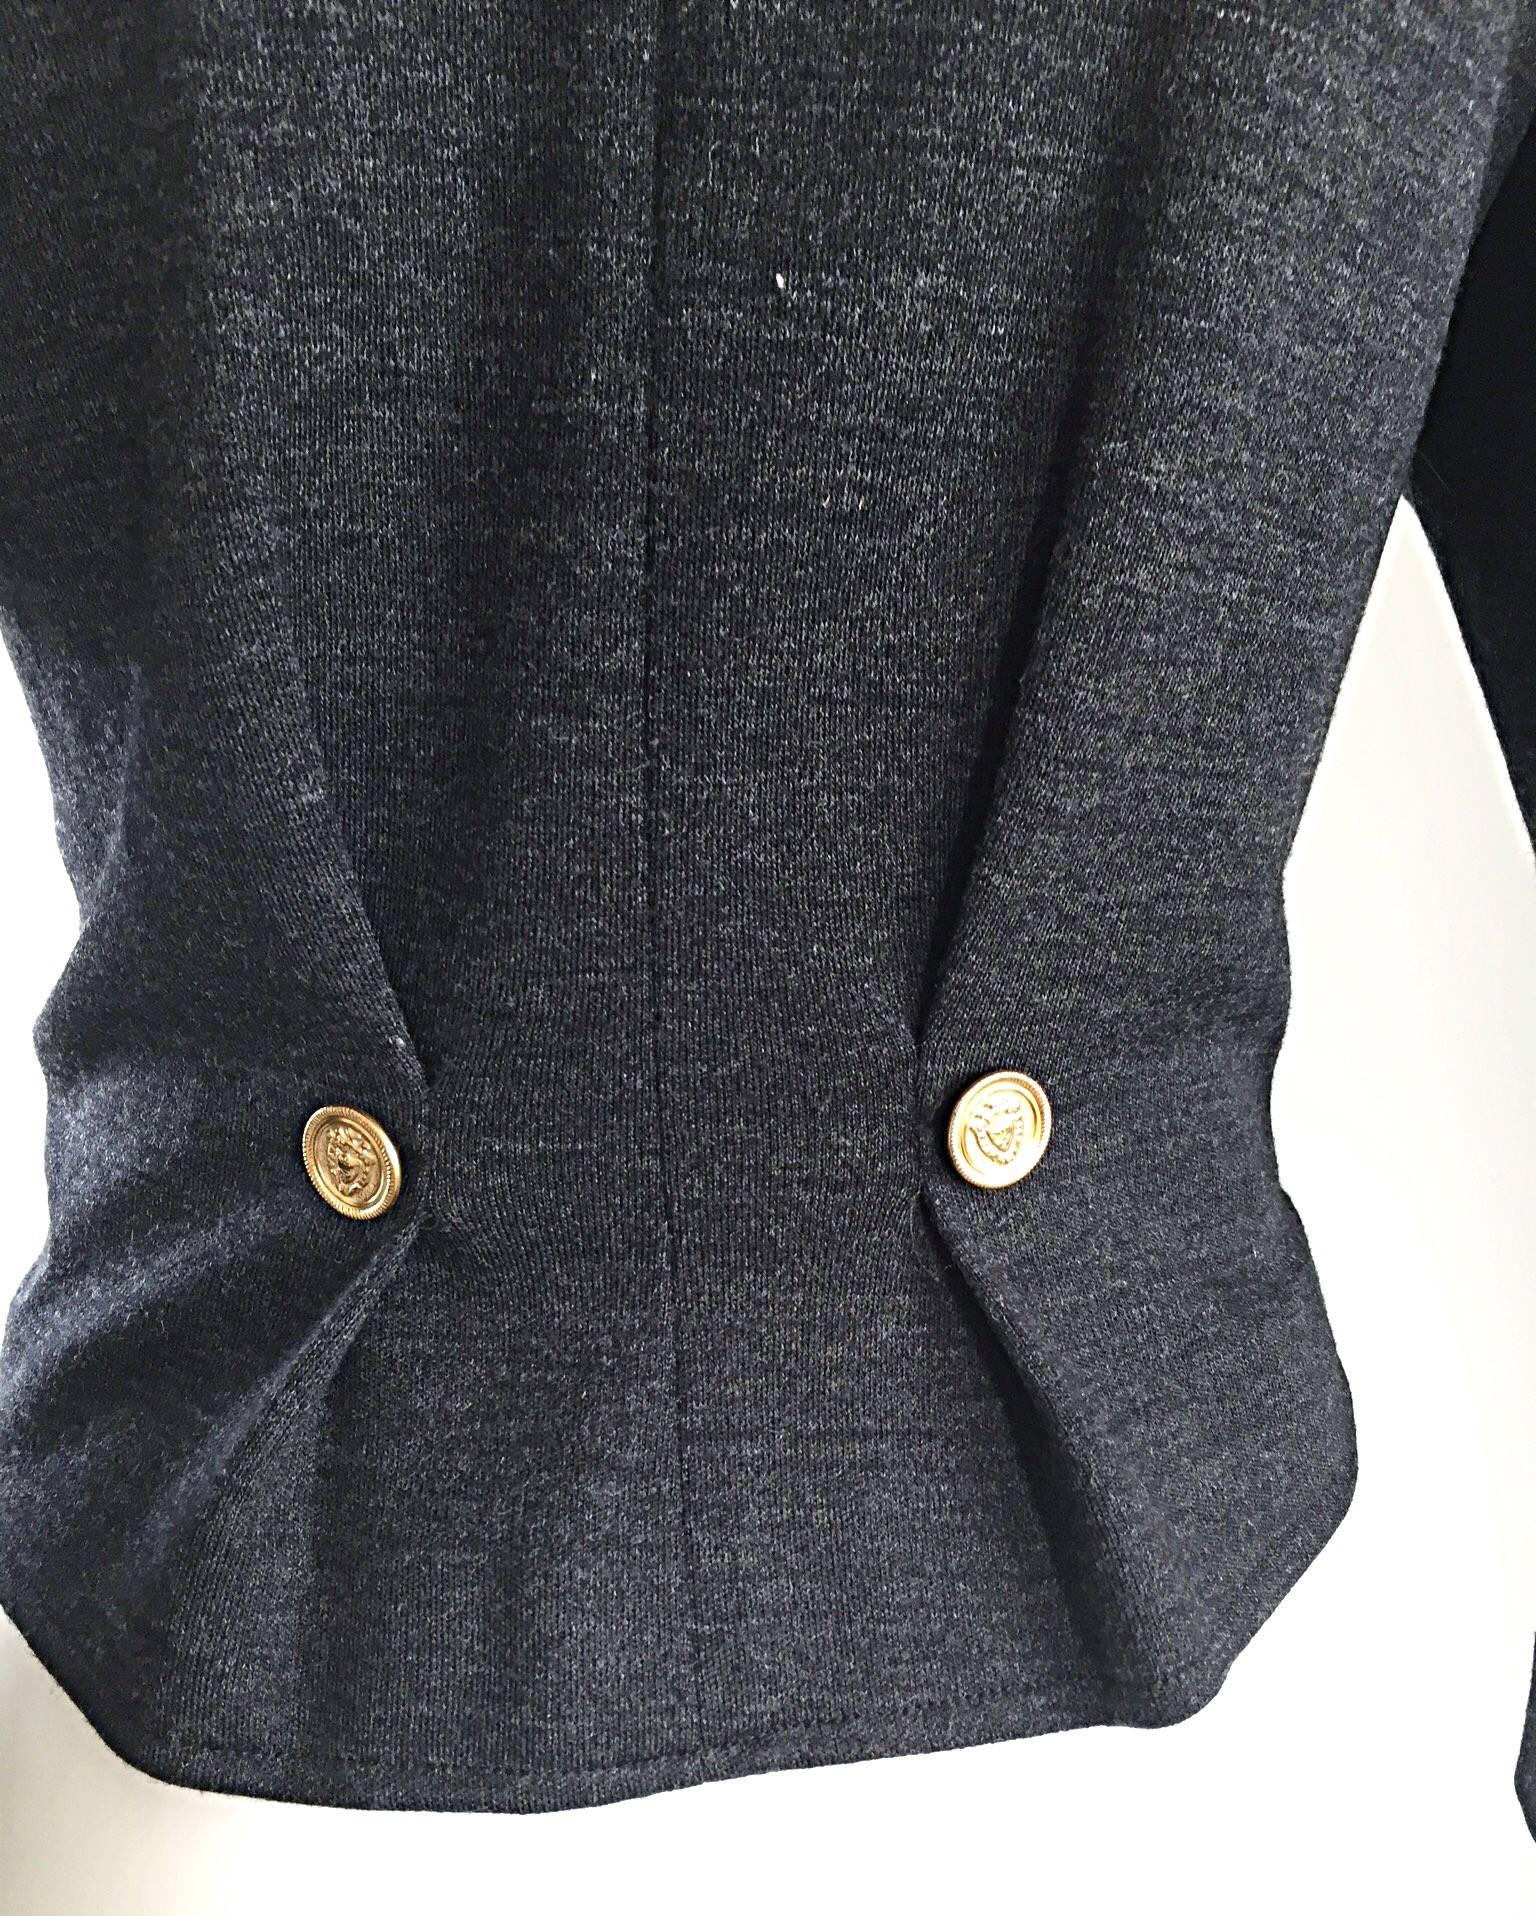 Vintage Nina Ricci Couture Charcoal Grey Double Breasted Wool Cardigan Jacket  In Excellent Condition For Sale In San Diego, CA